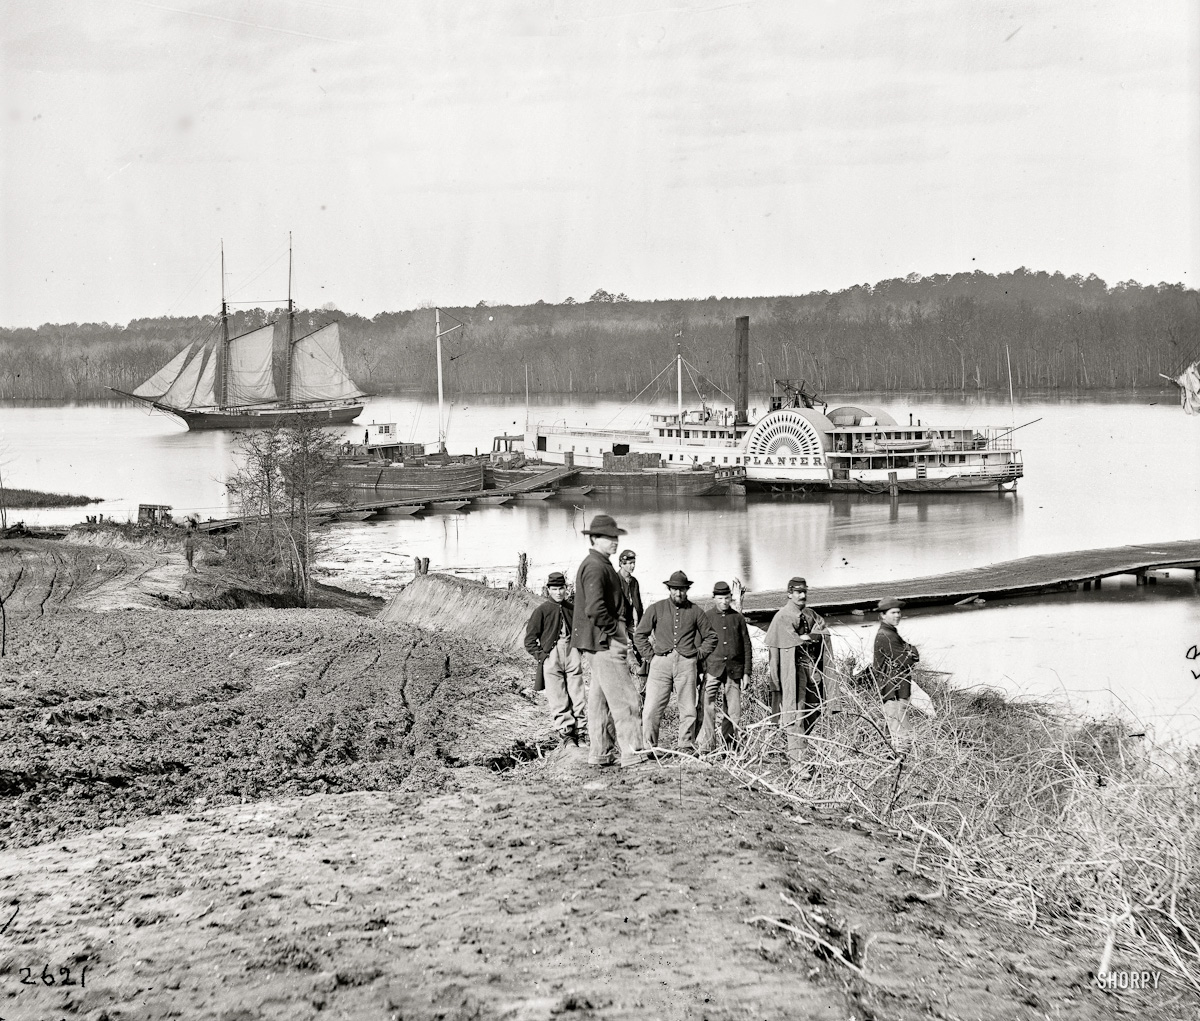 004  1865  " City Point , Virginia vicinity. Medical supply boat Planter at General Hospital wharf on the Appomattox "